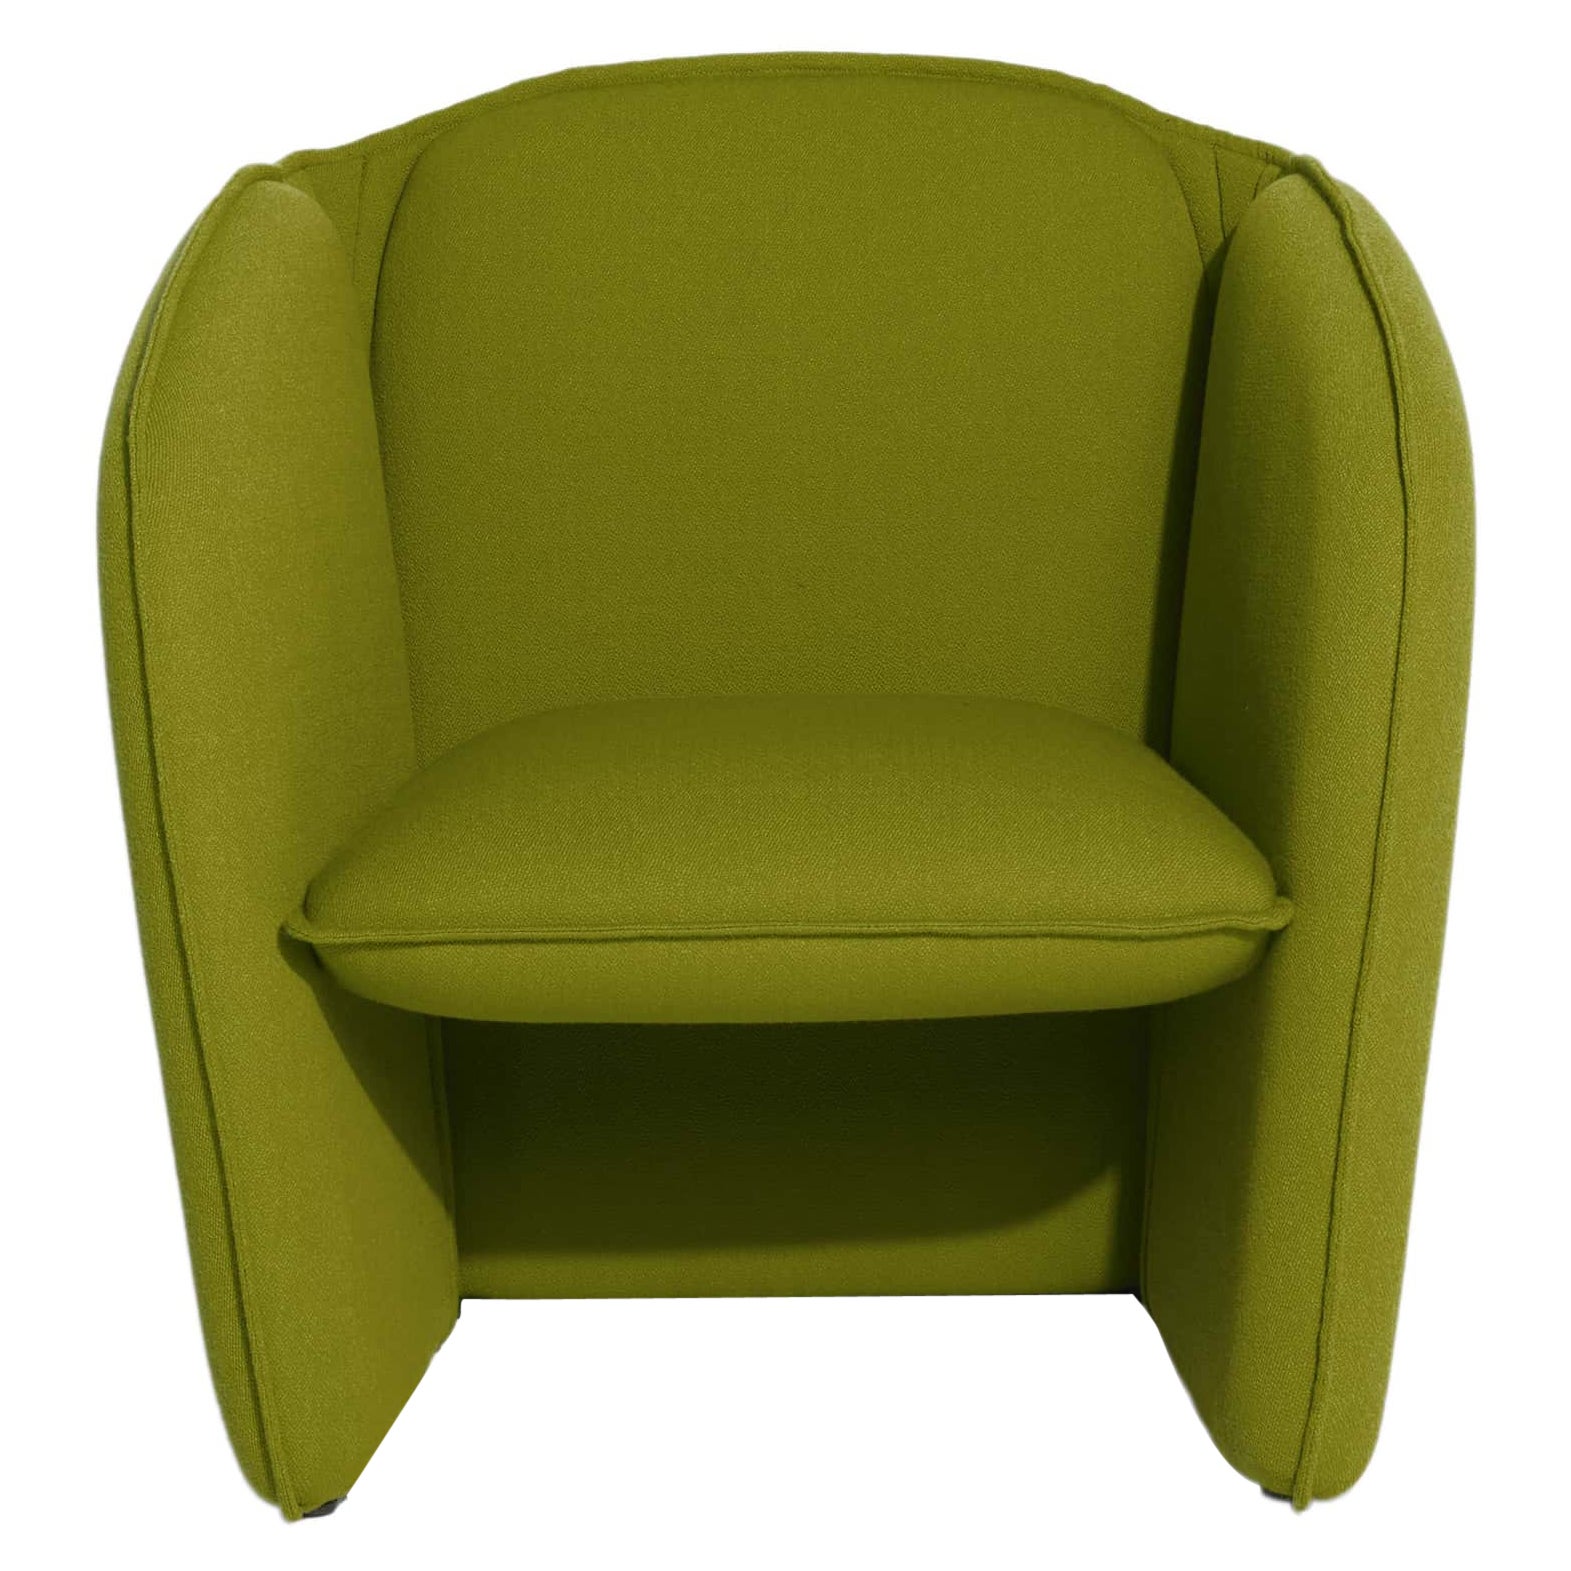 Petite Friture Lily Armchair in Olive Green by Färg & Blanche, 2022 For Sale